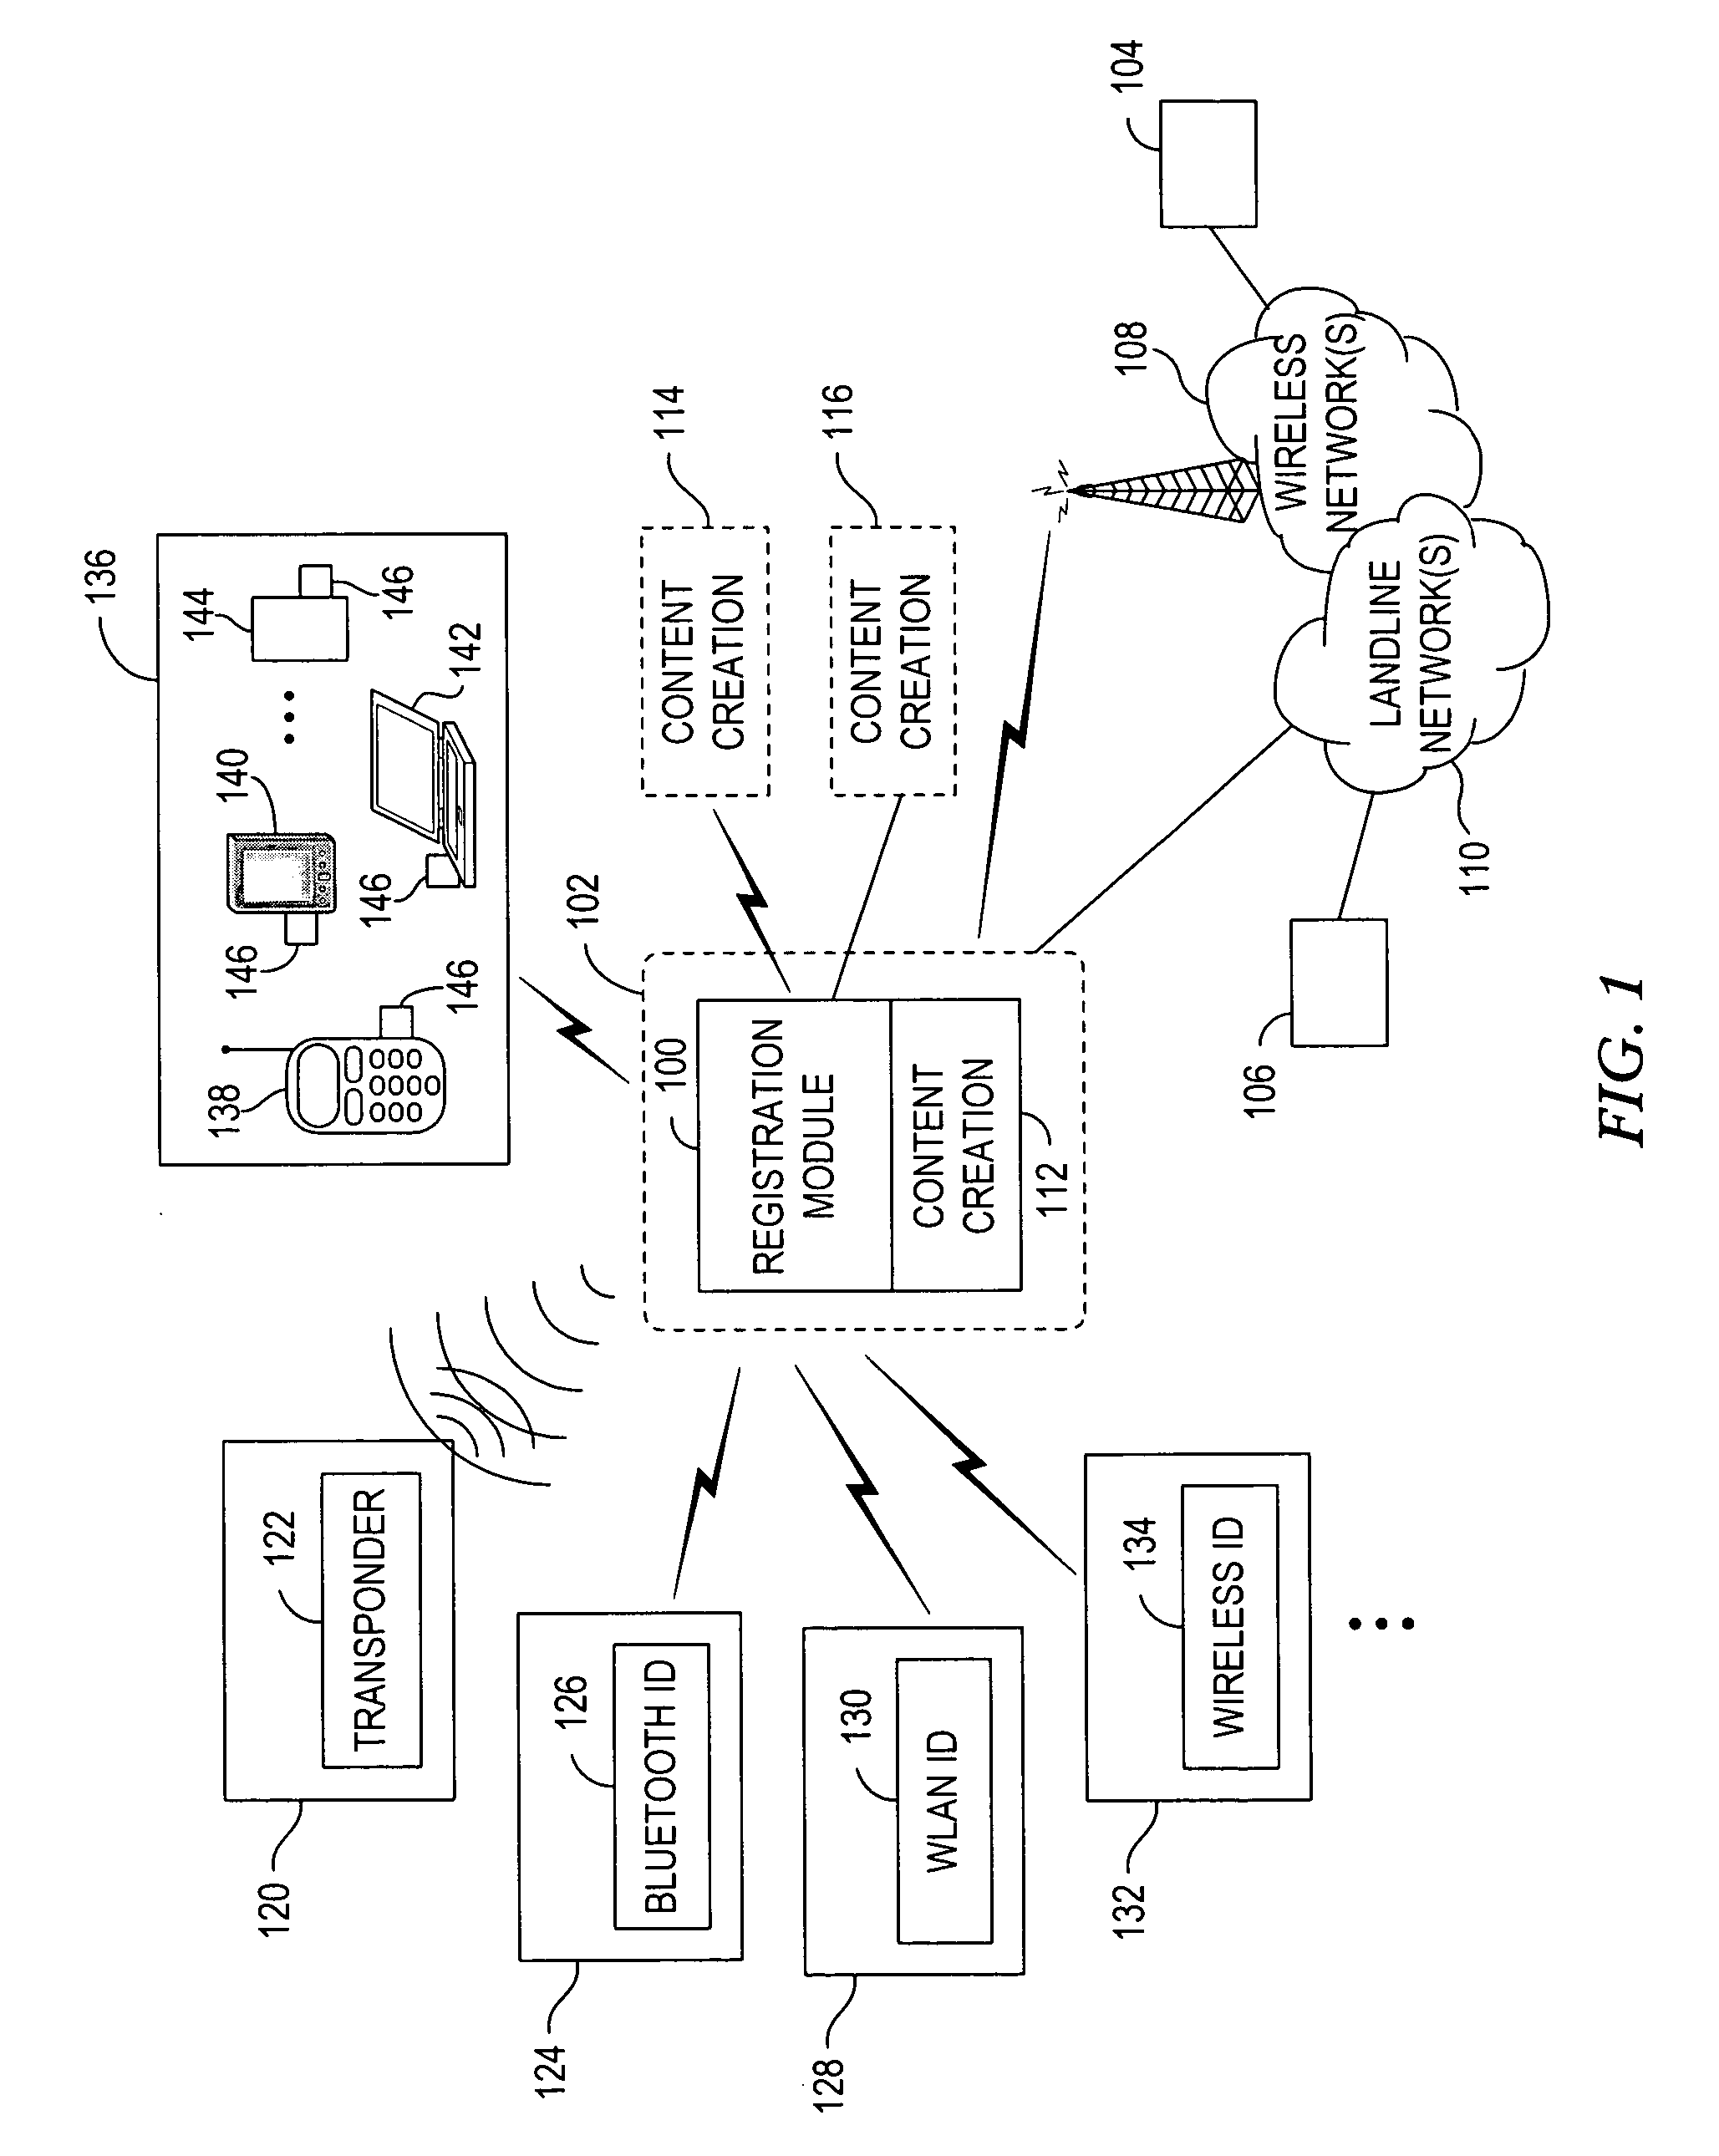 System and method for registering attendance of entities associated with content creation